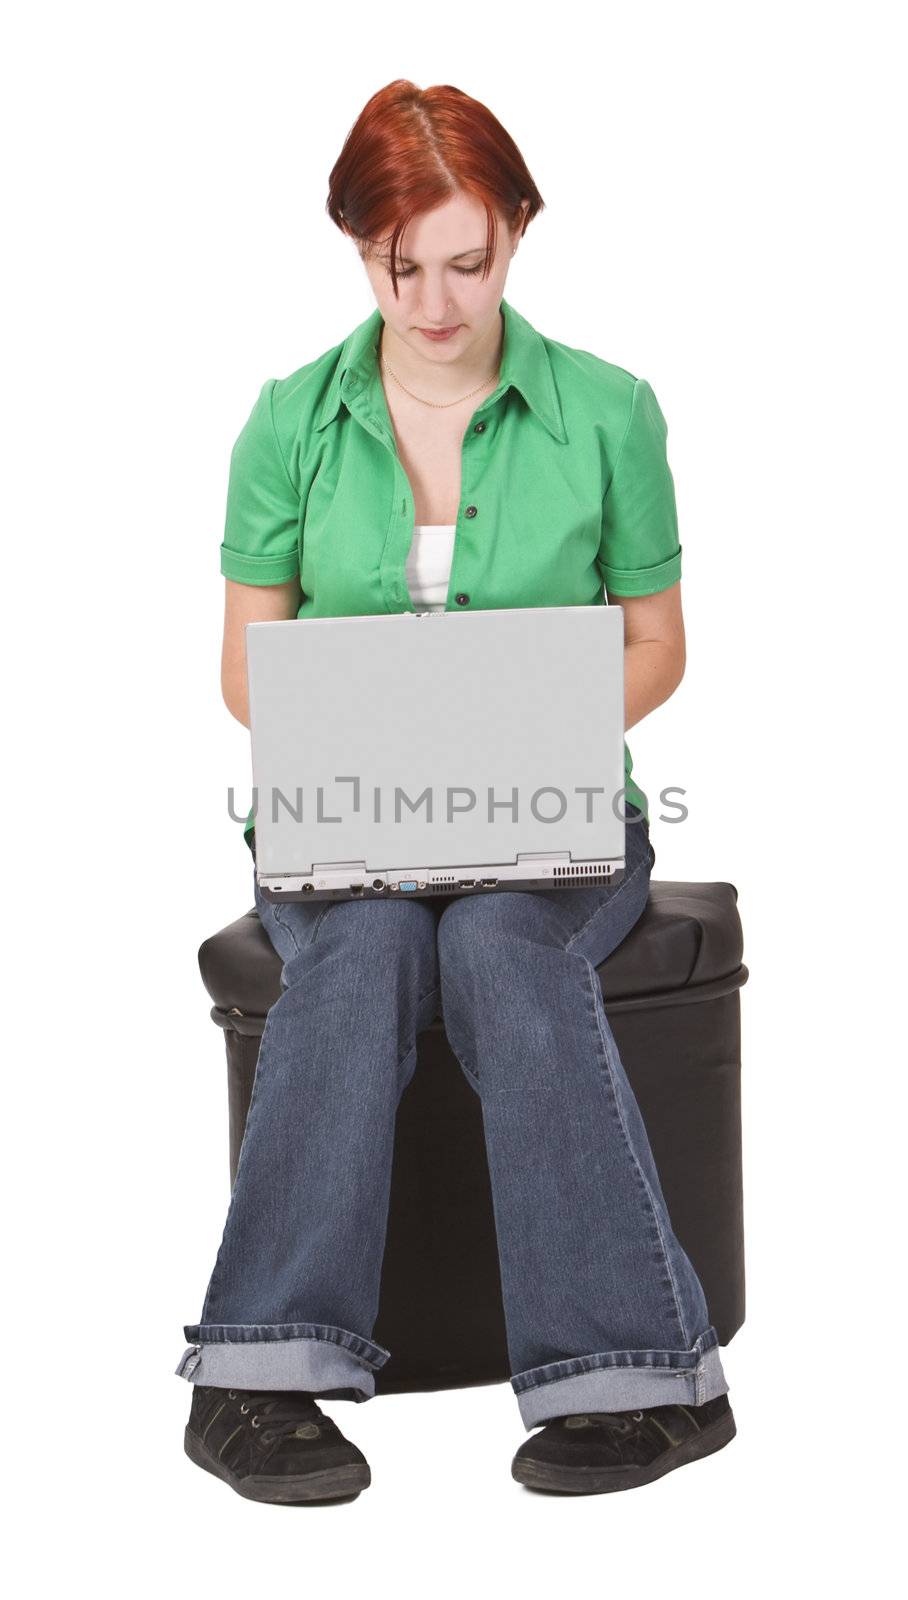 Image of a redheaded teen girl working on a laptop.Shot with Canon 70-200mm f/2.8L IS USM